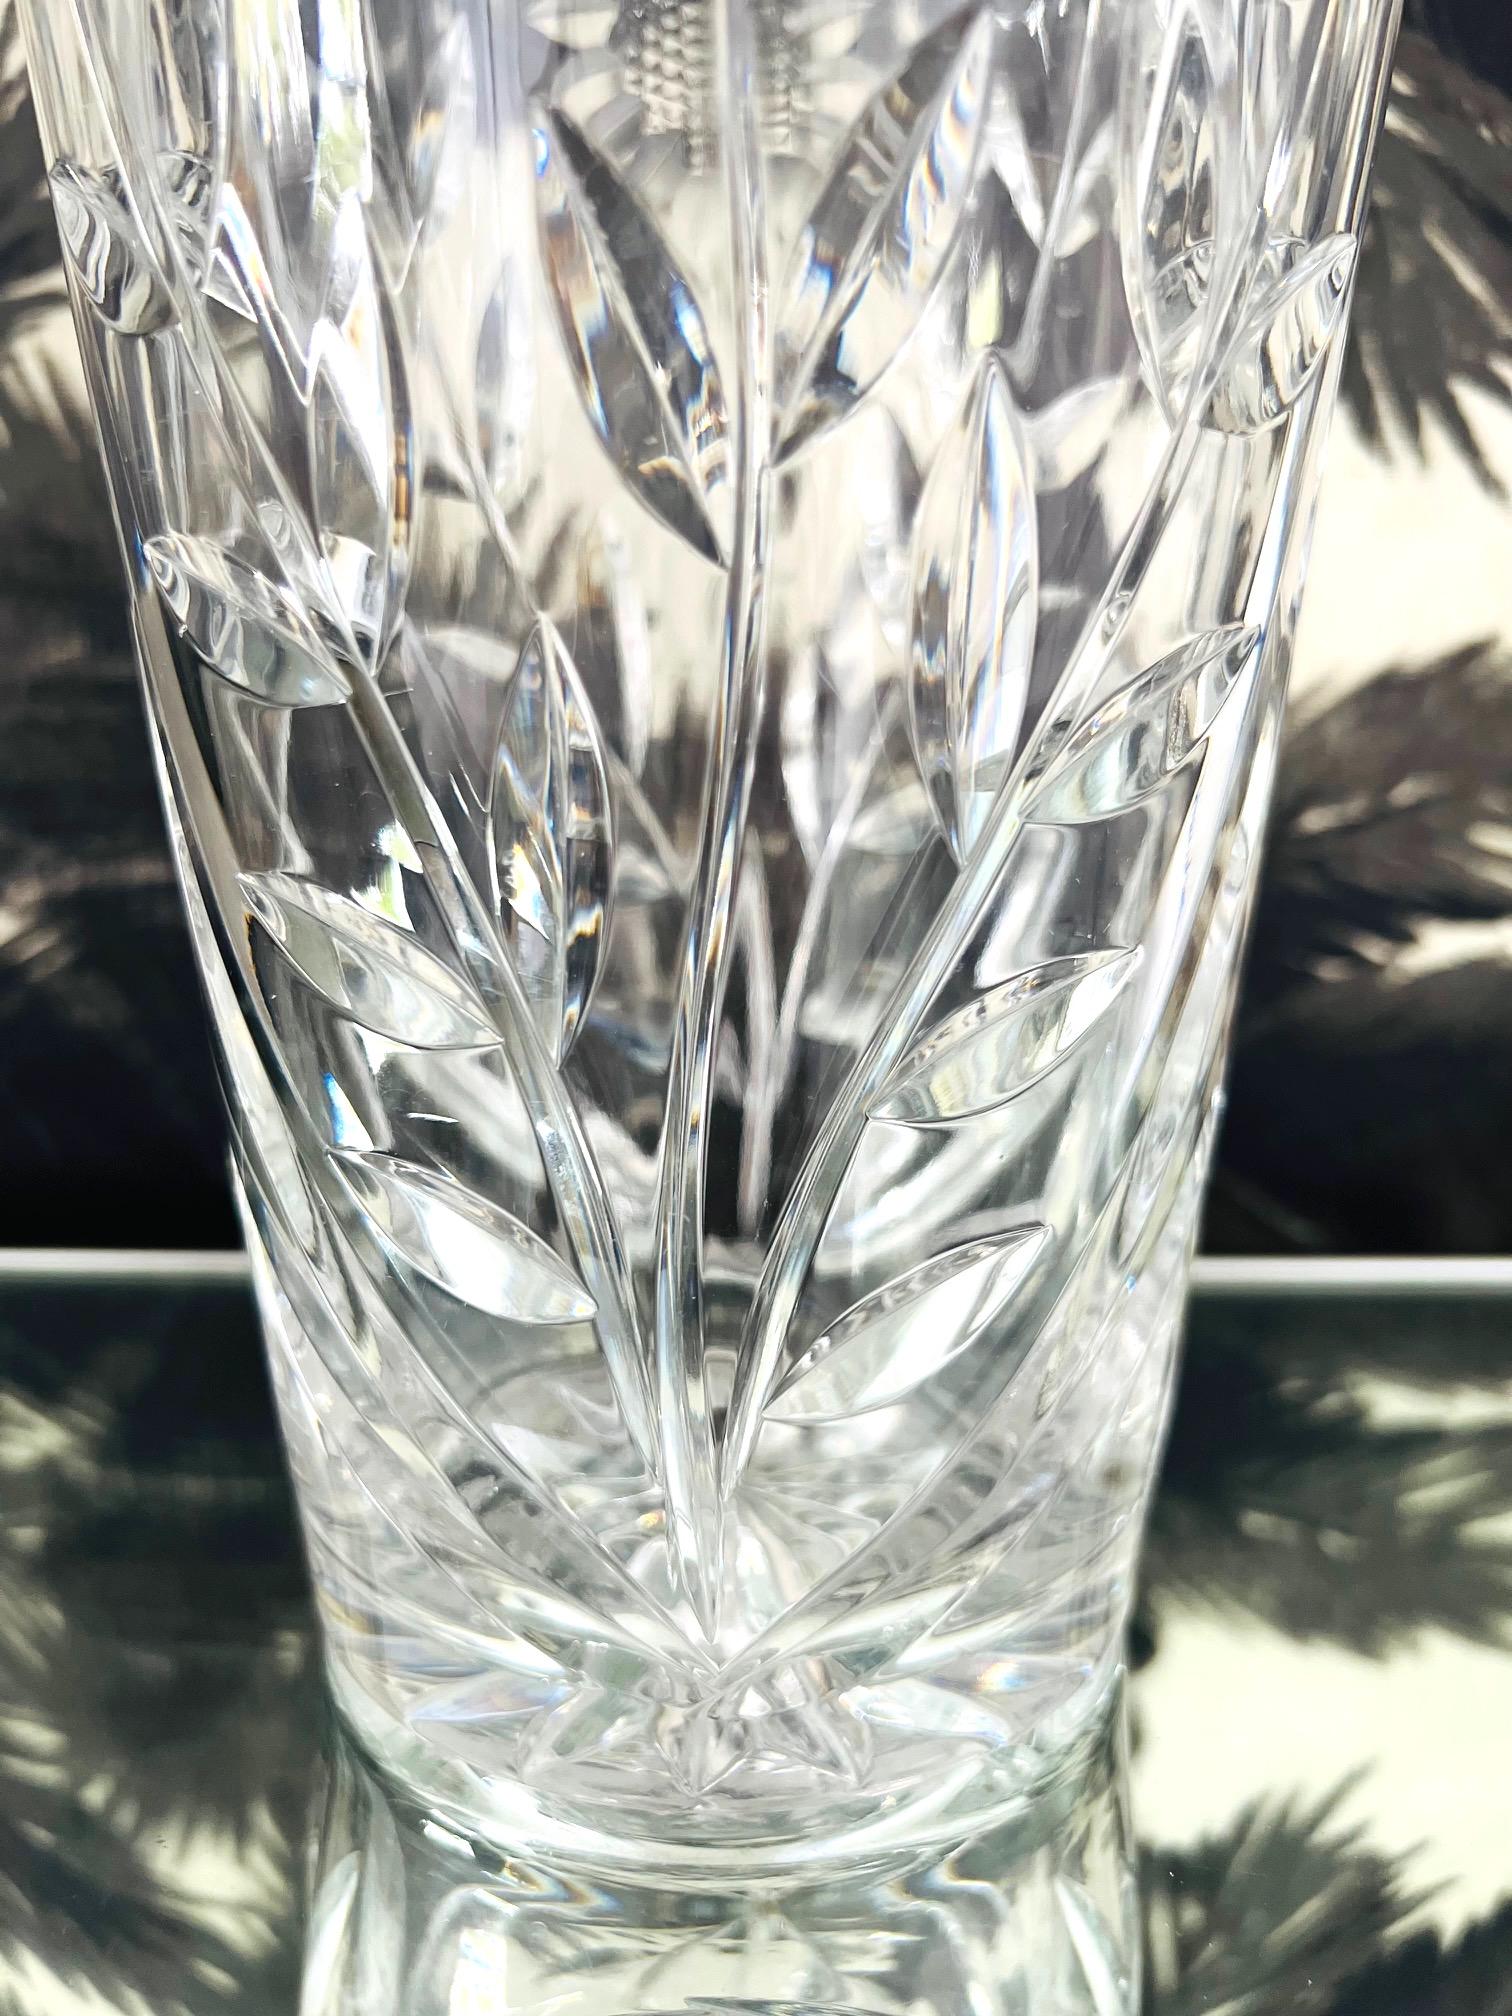 Waterford Crystal Etched Sunflower Vase with Cut Glass Designs, England, c. 2010 For Sale 4